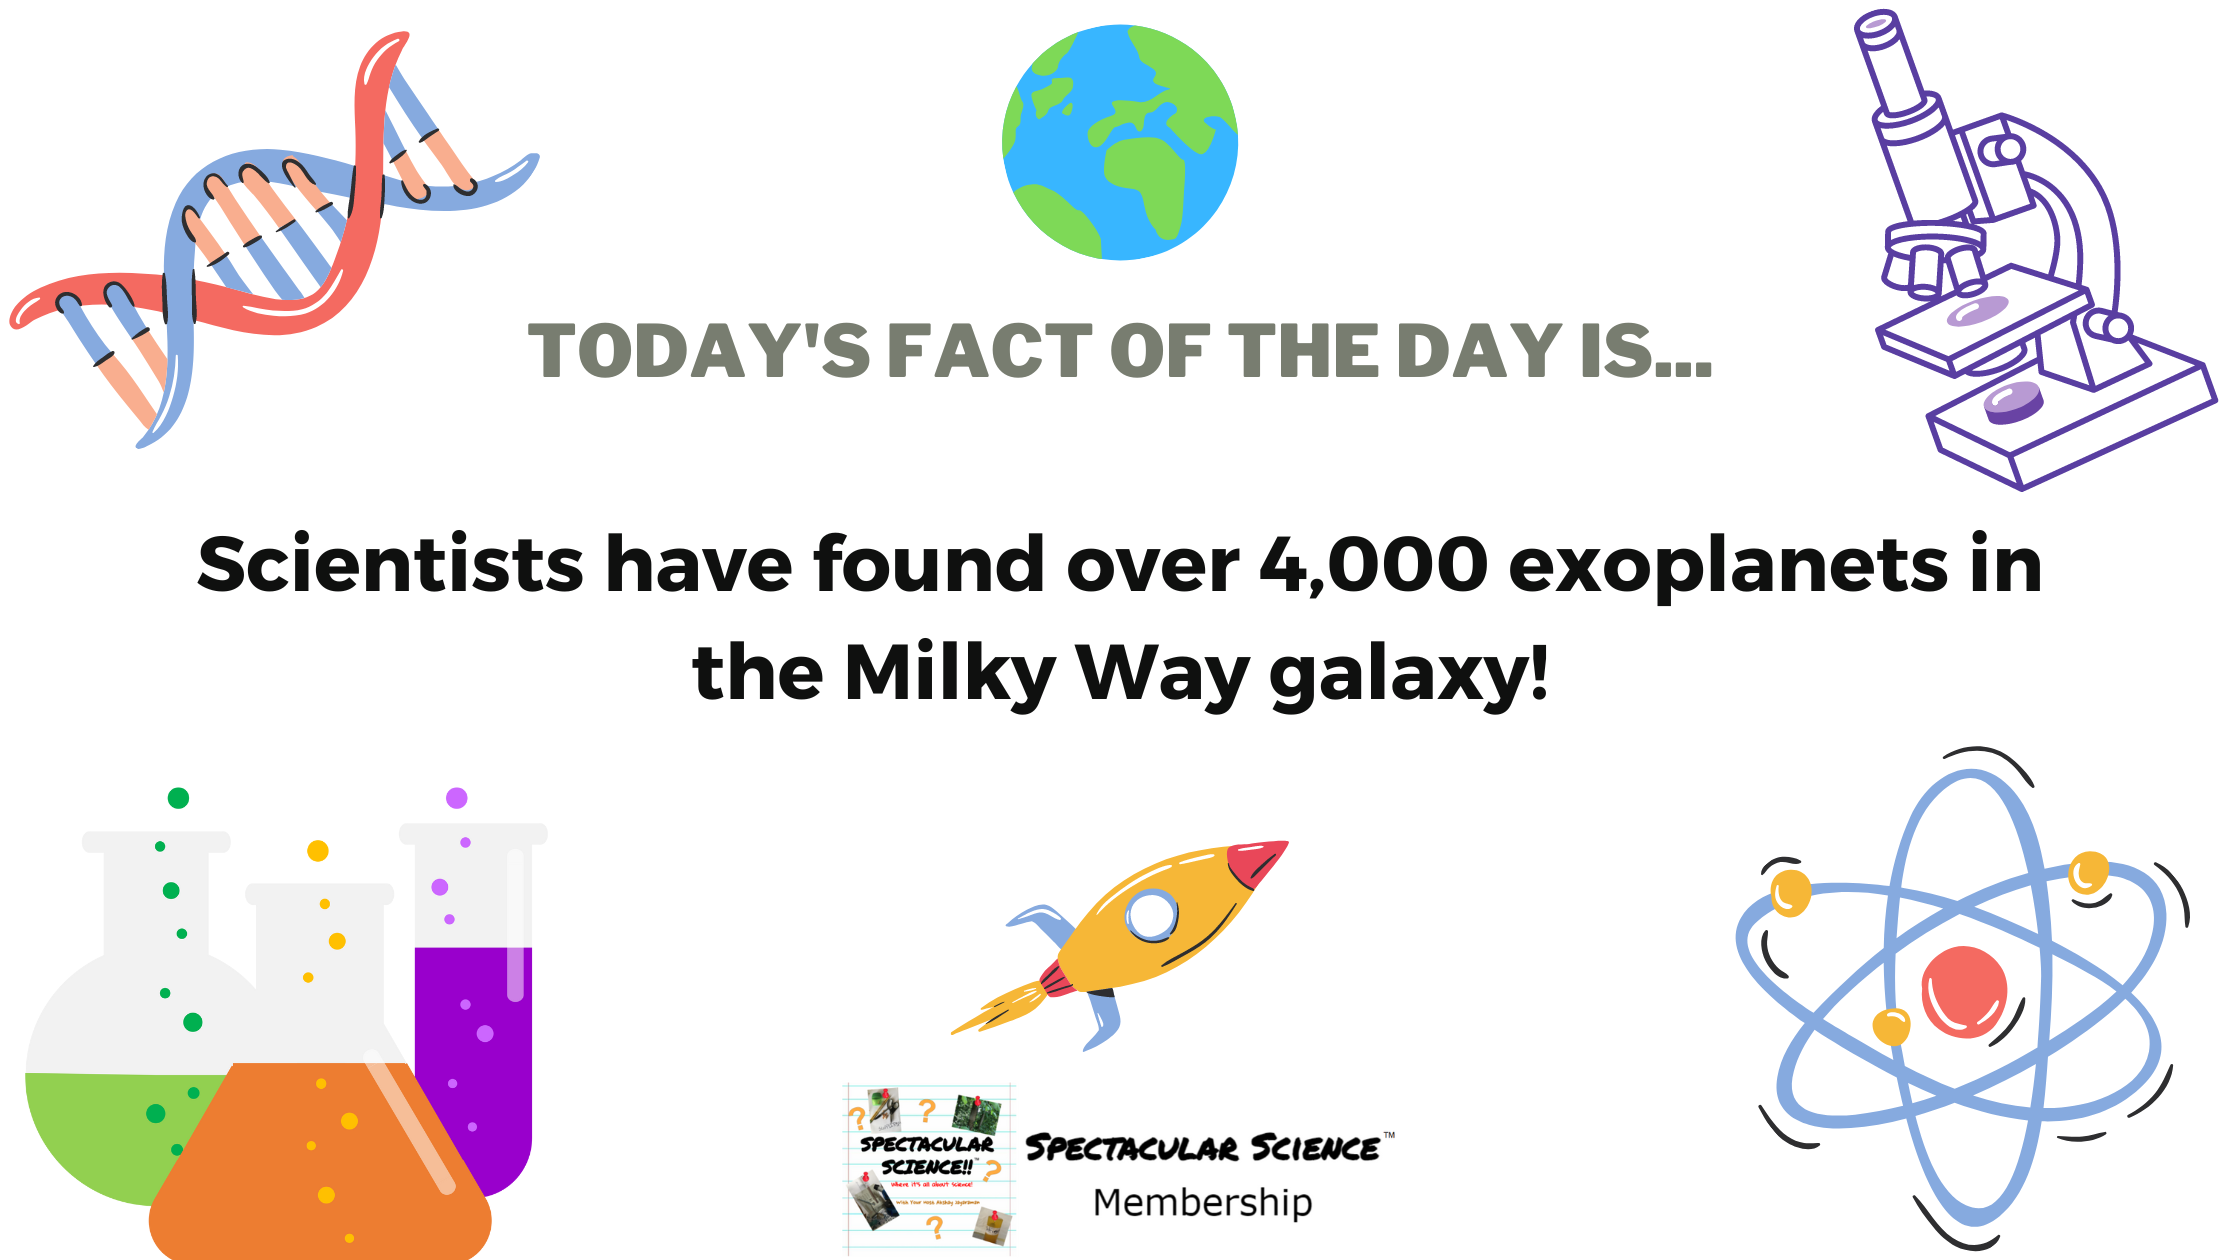 Fact of the Day Image July 16th